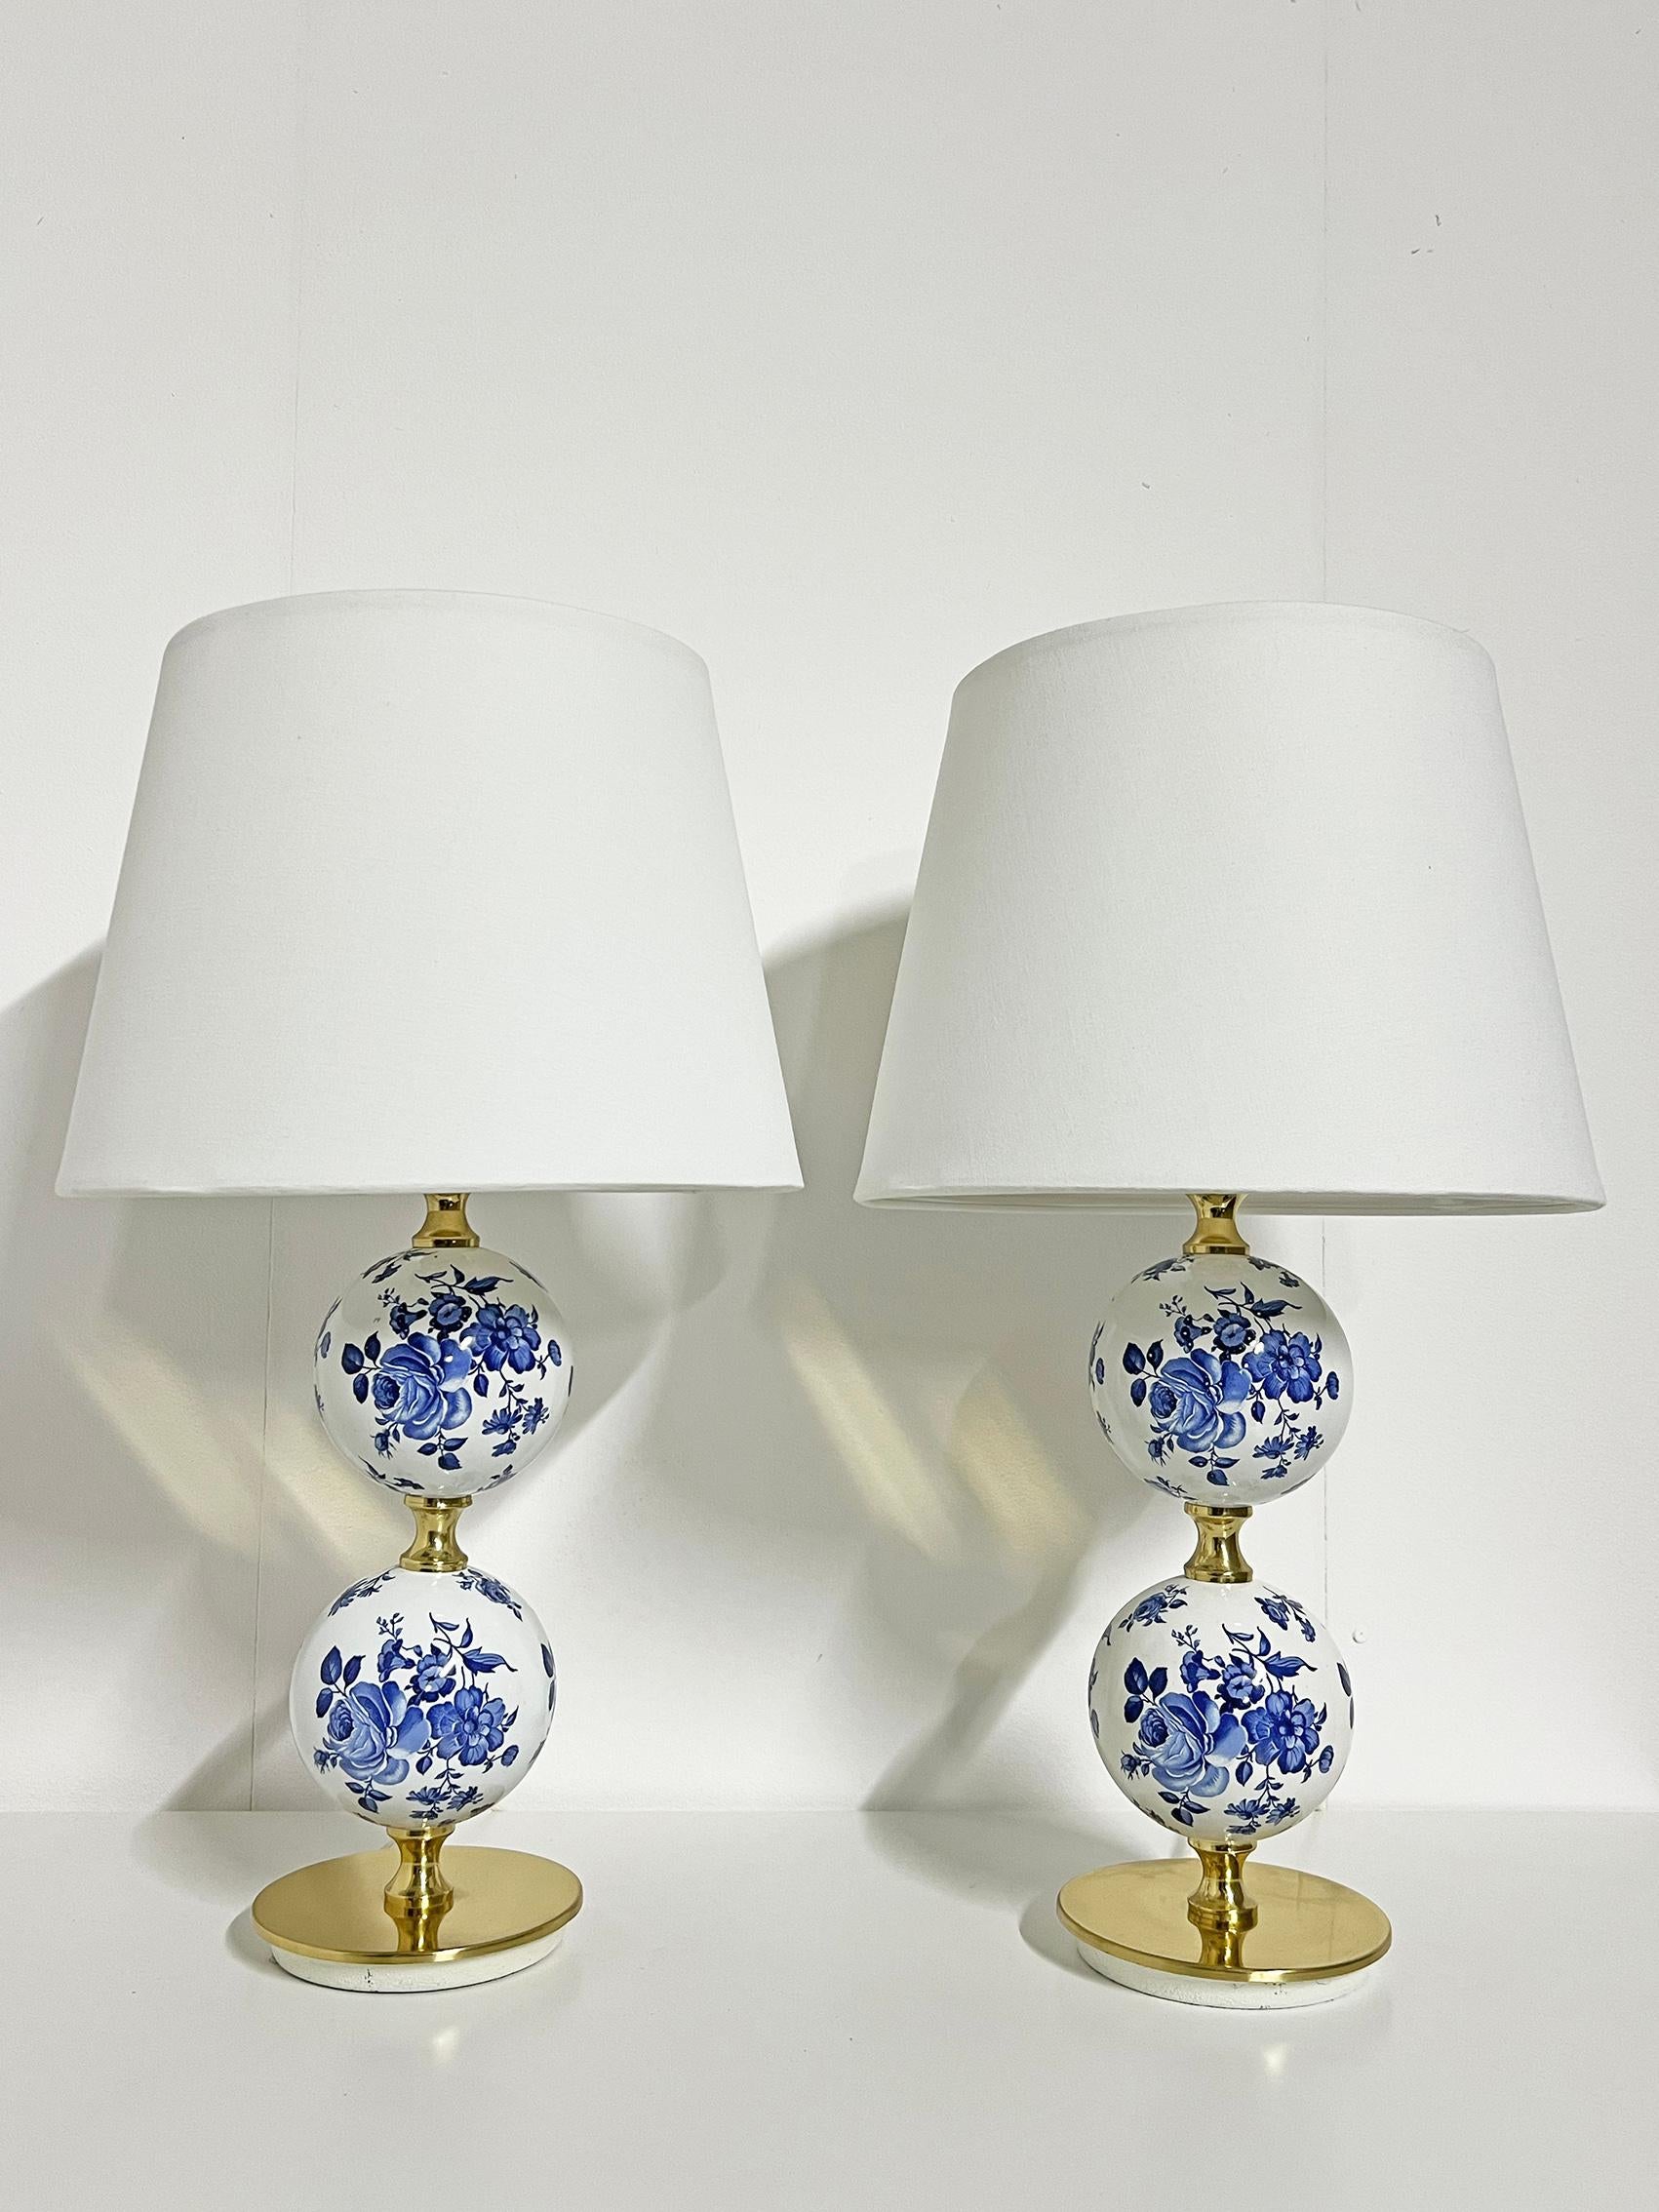 Pair of beautiful scandinavian modern table lamps, Tranås Stilarmatur ca 1960s.
Rare model in porcelain and brass with beautiful floral pattern. 
Signed with makers mark.
Good vintage condition, wear and patina consistent with age and use.
Small